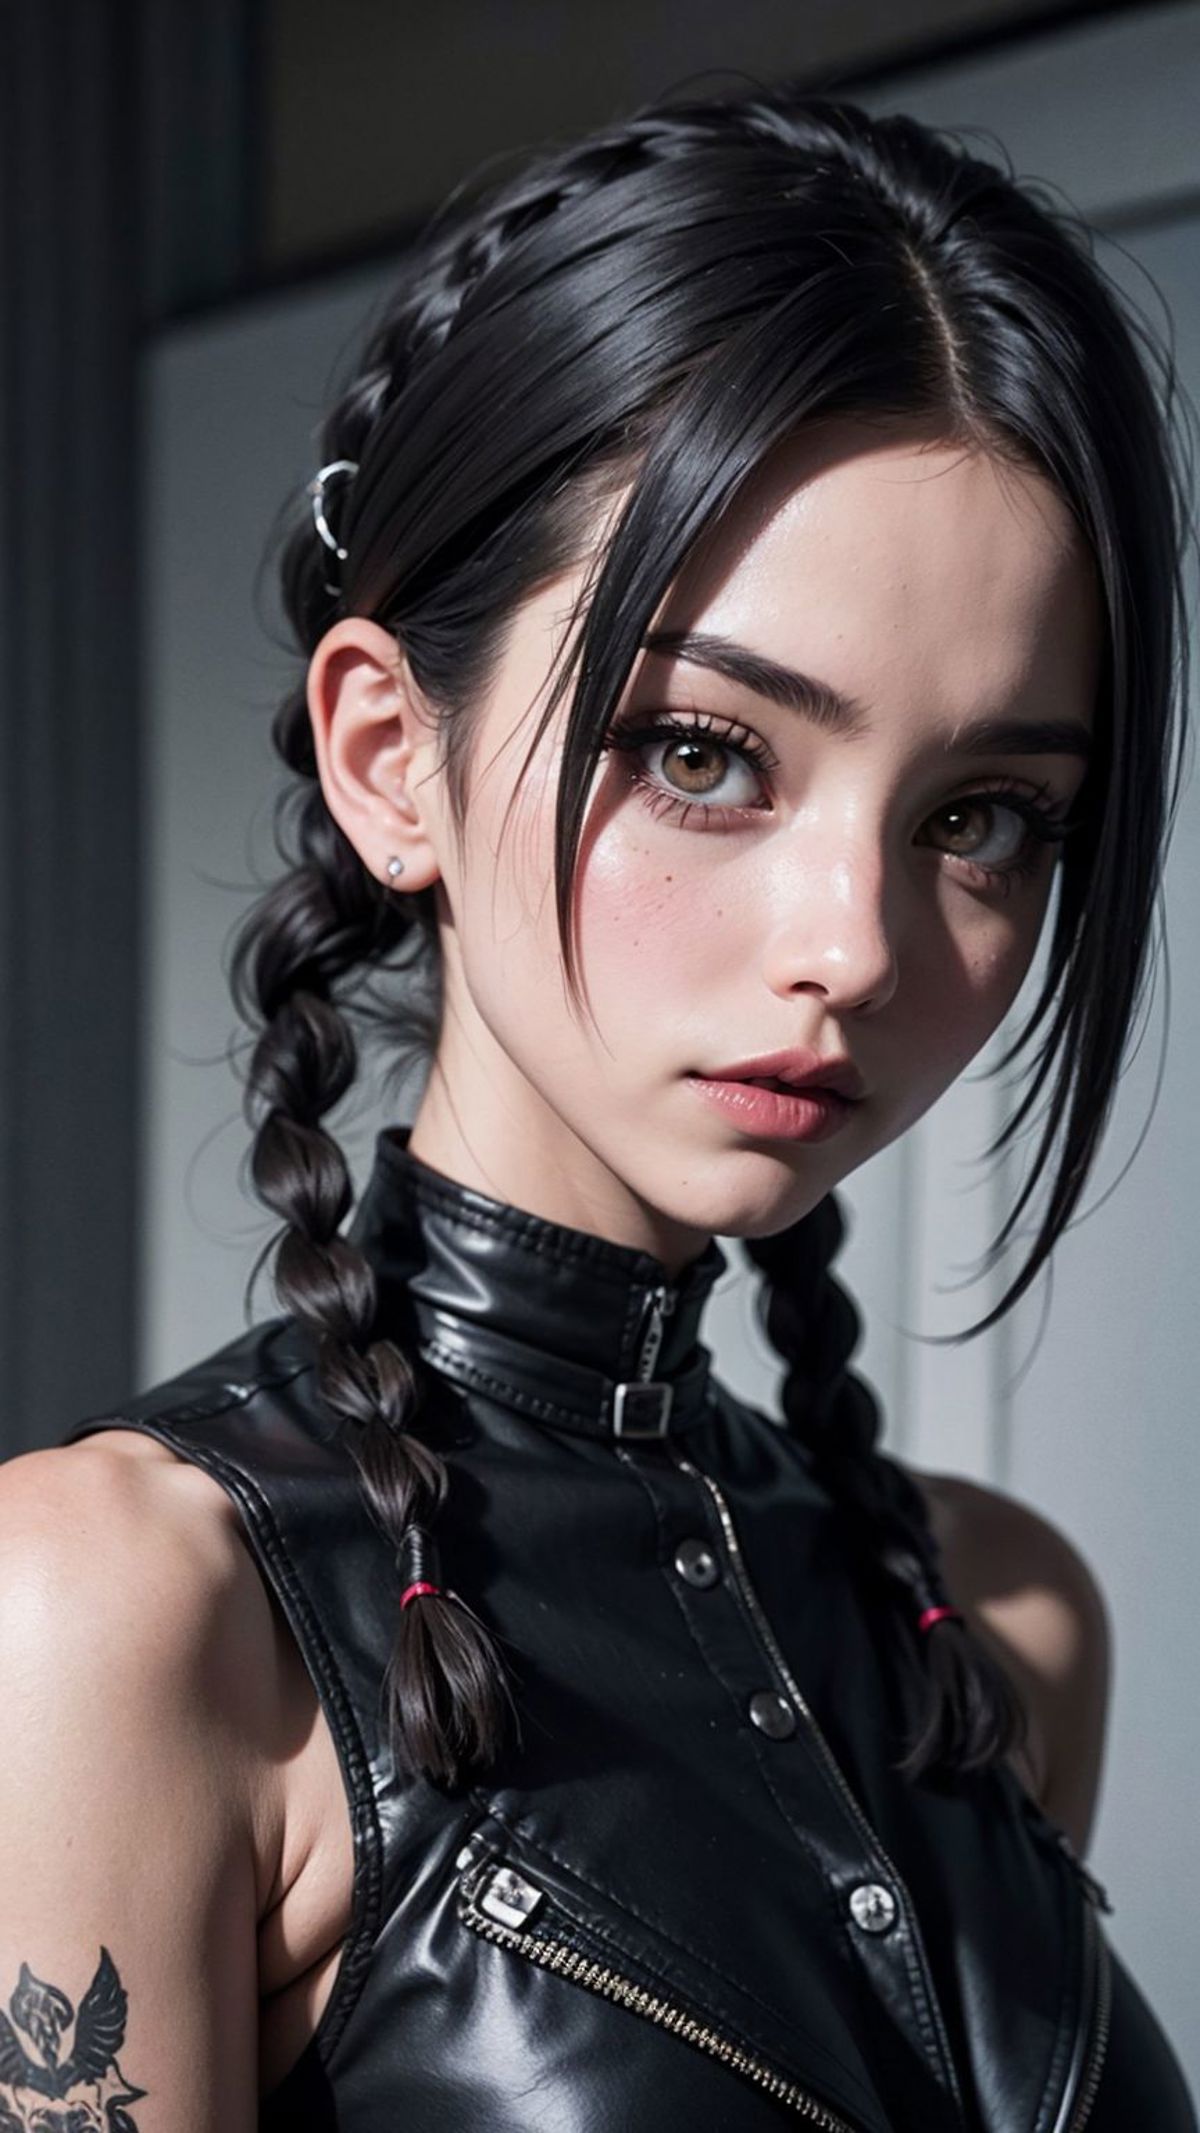 A young girl with black hair, wearing a black leather shirt and pigtails.